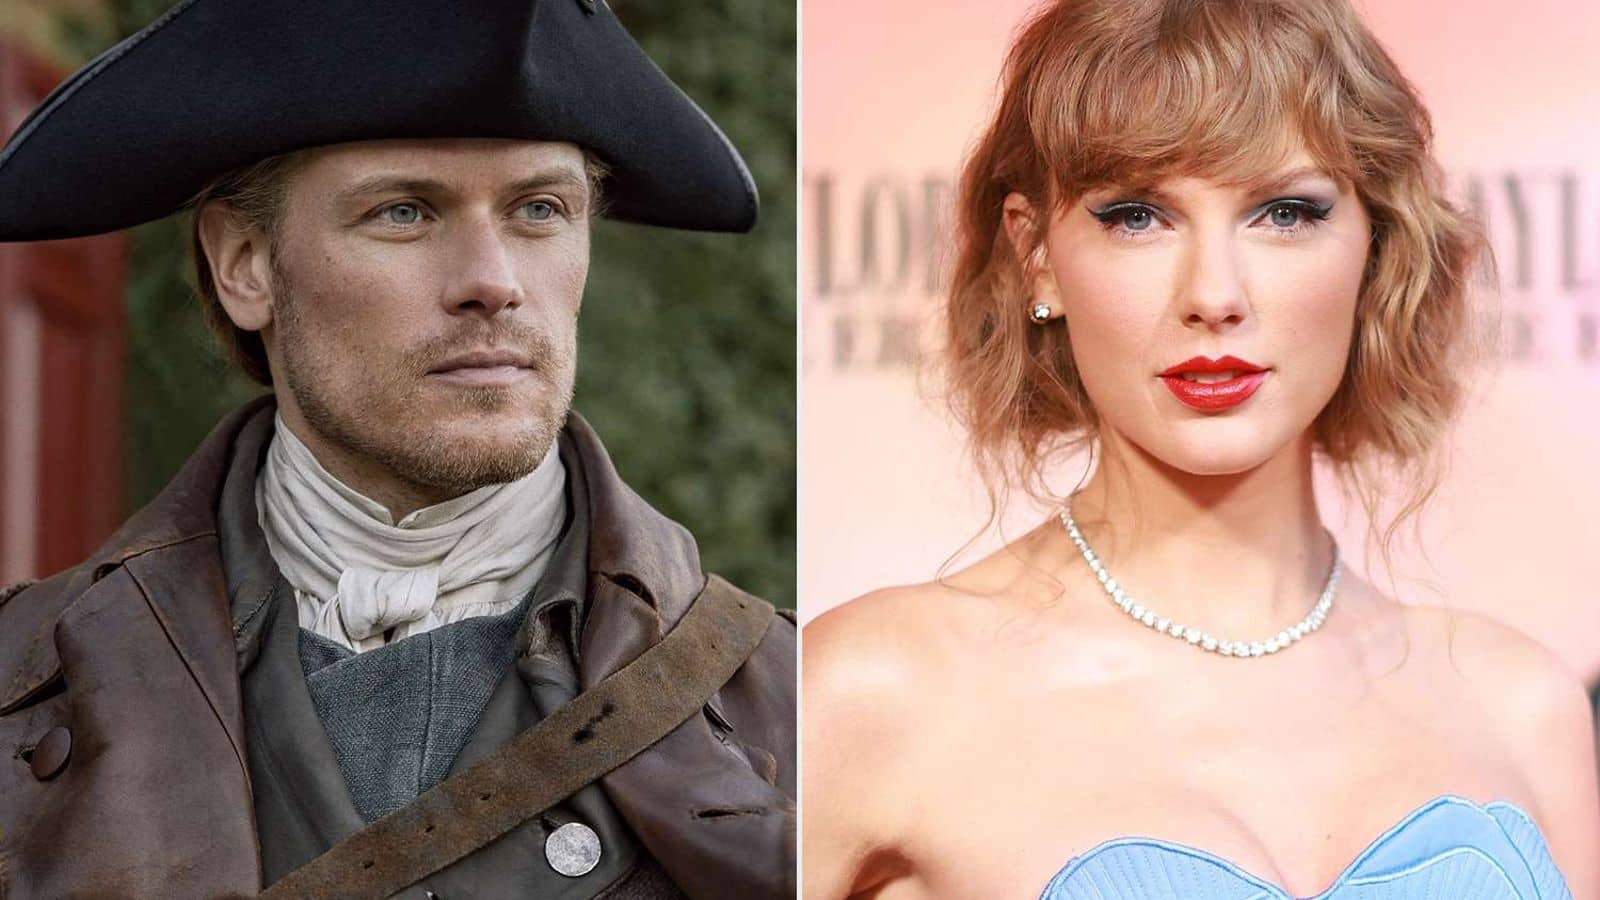 Sam Heughan thinks Taylor will forget Travis after meeting him